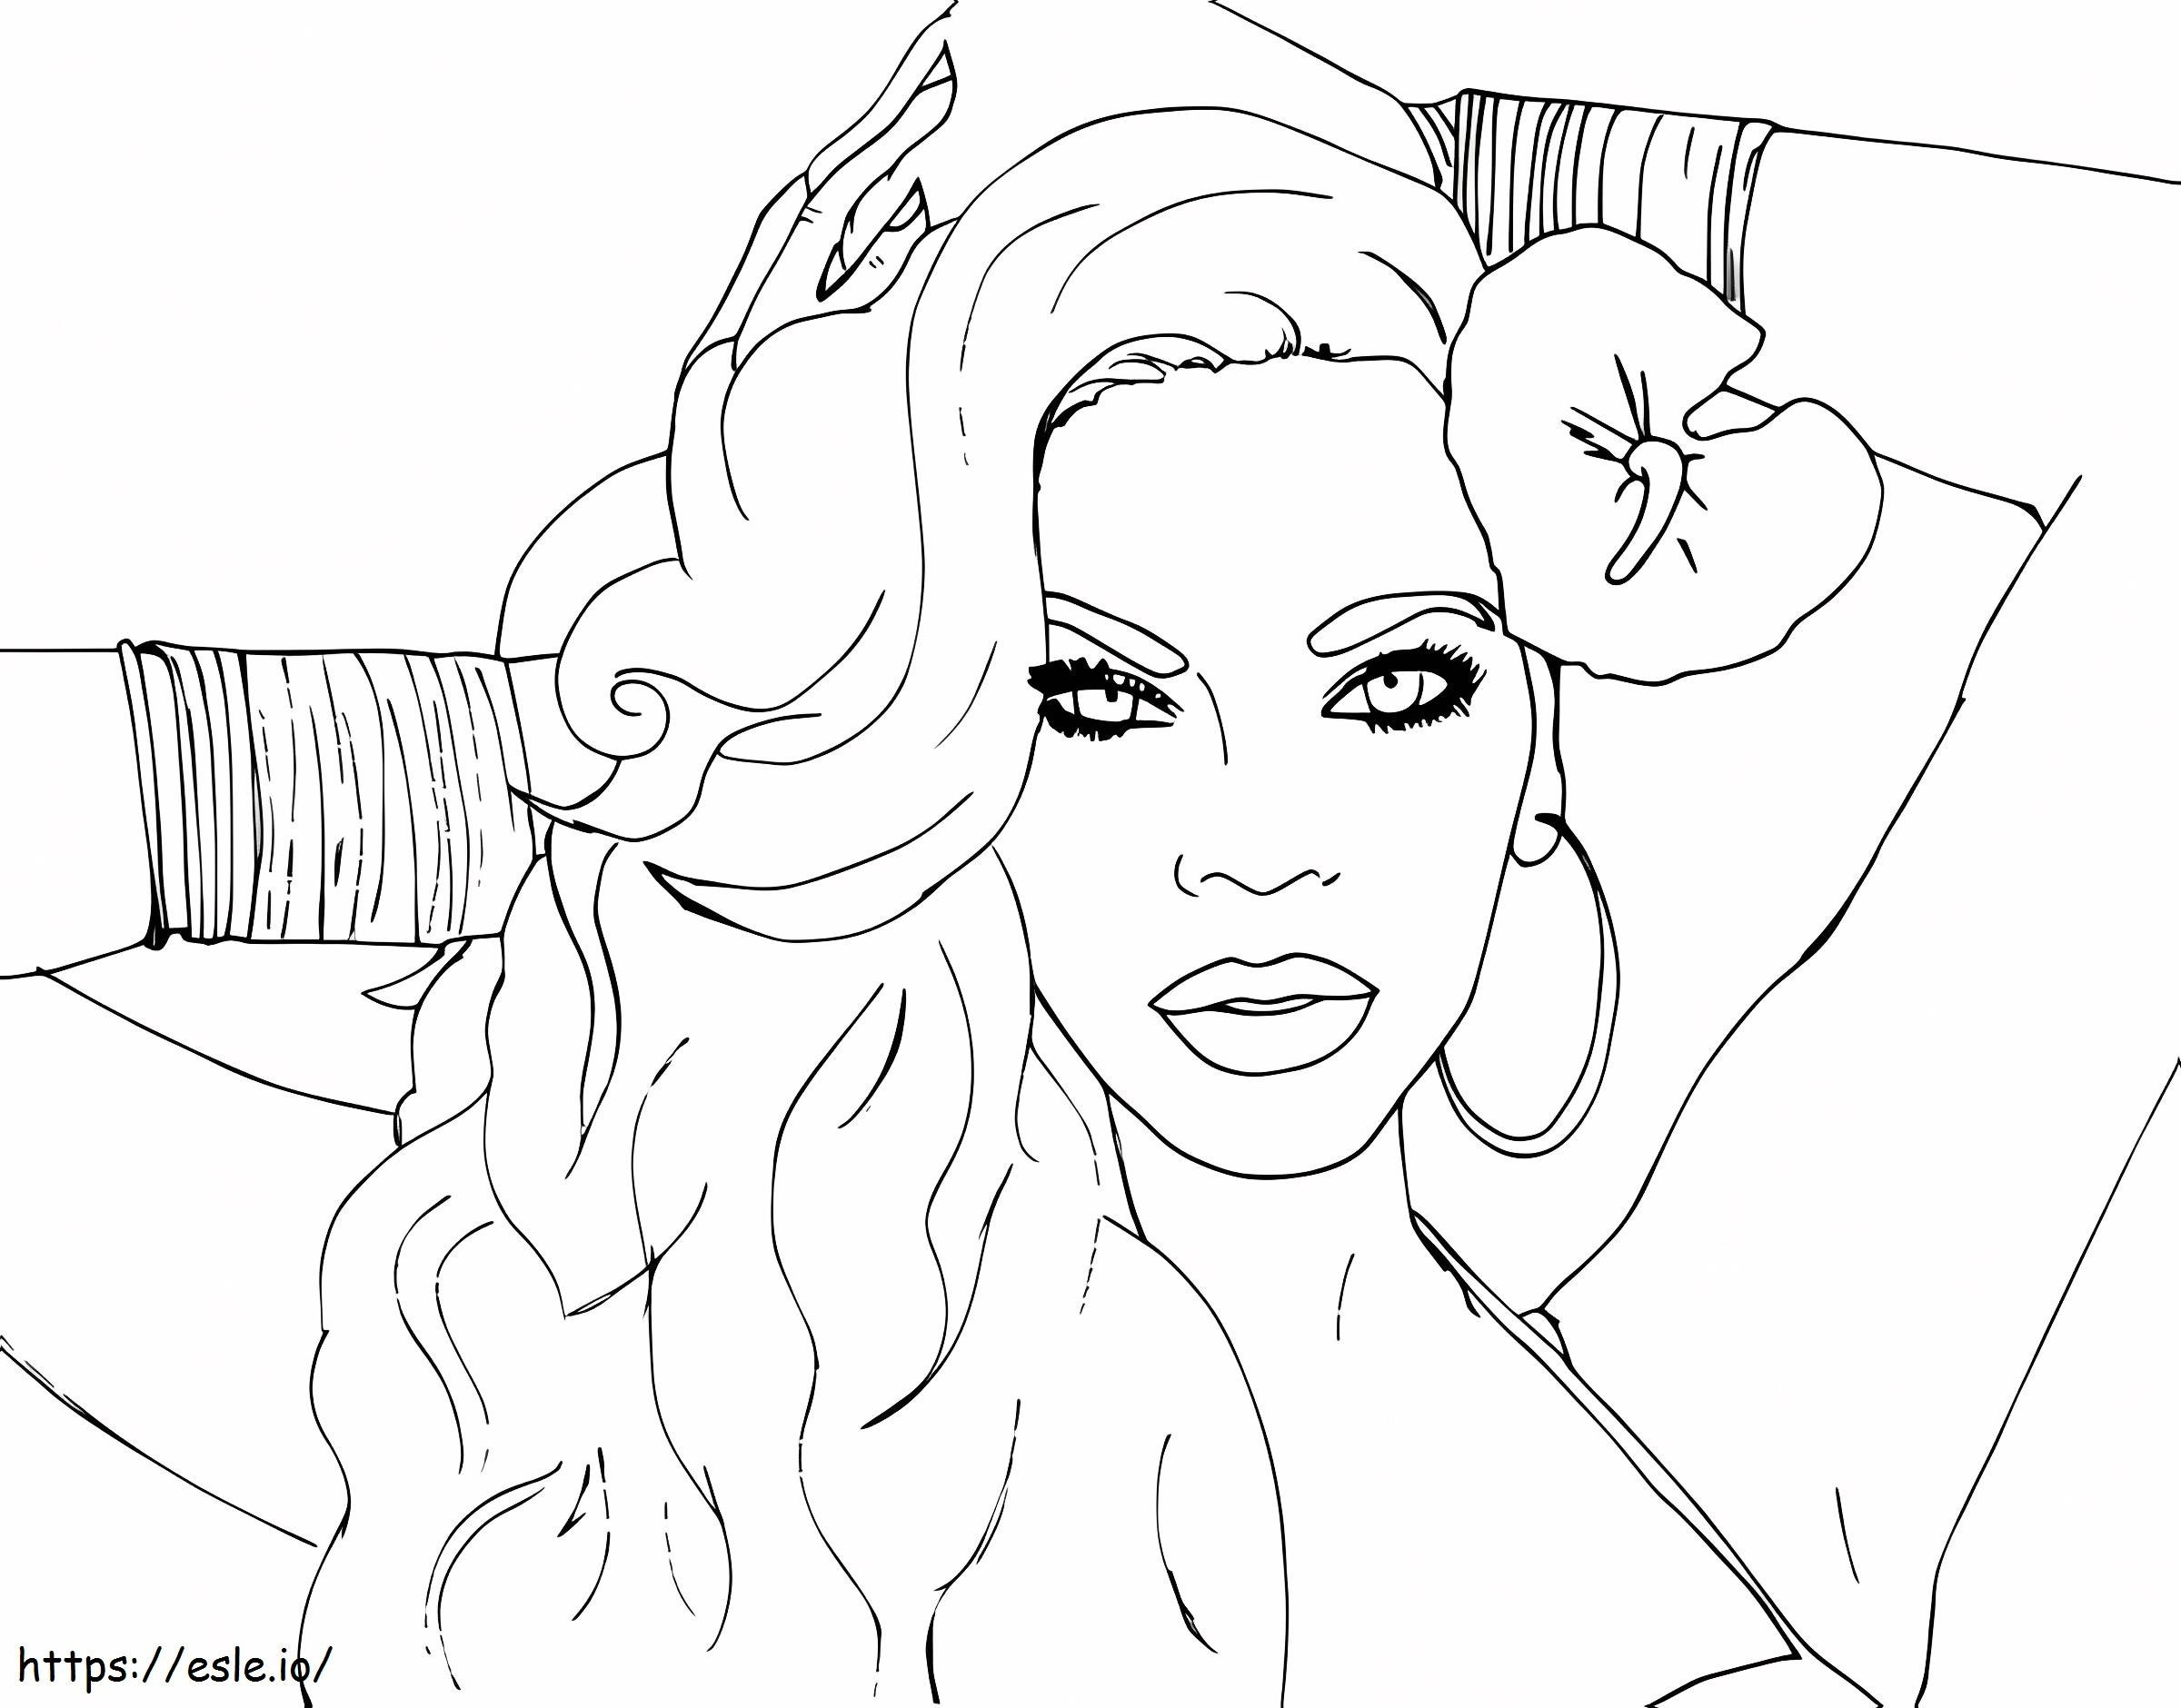 1541555615_Beyonce Drawing 4 coloring page